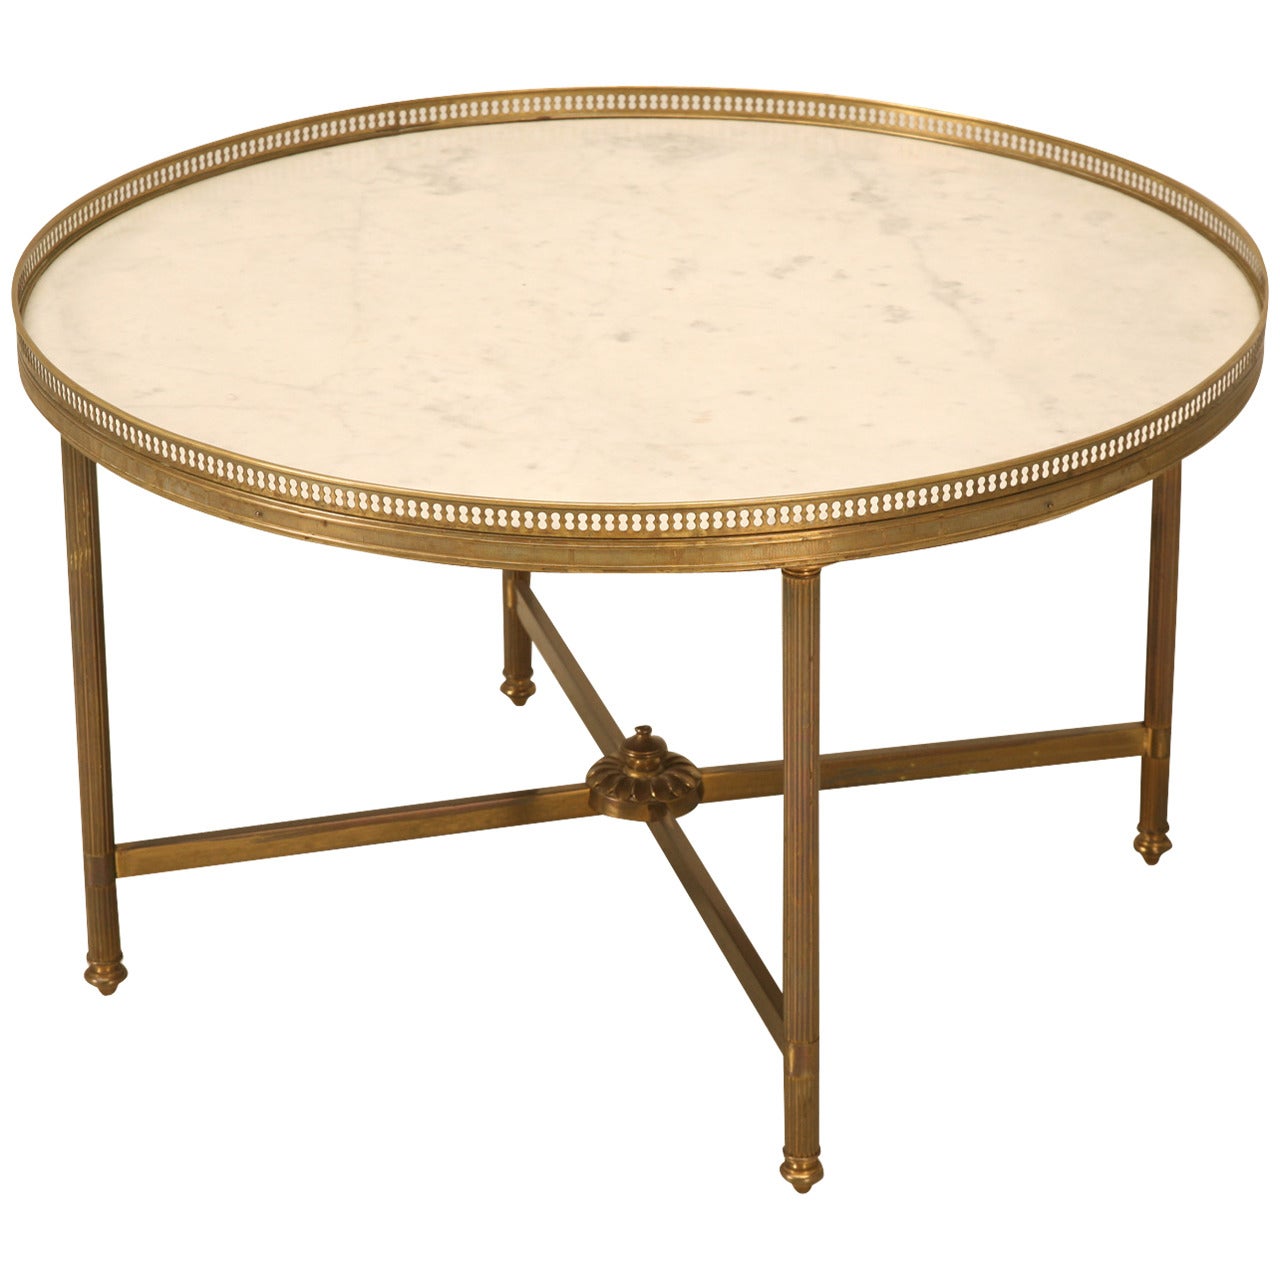 Vintage French Marble and Brass Cocktail or Coffee Table